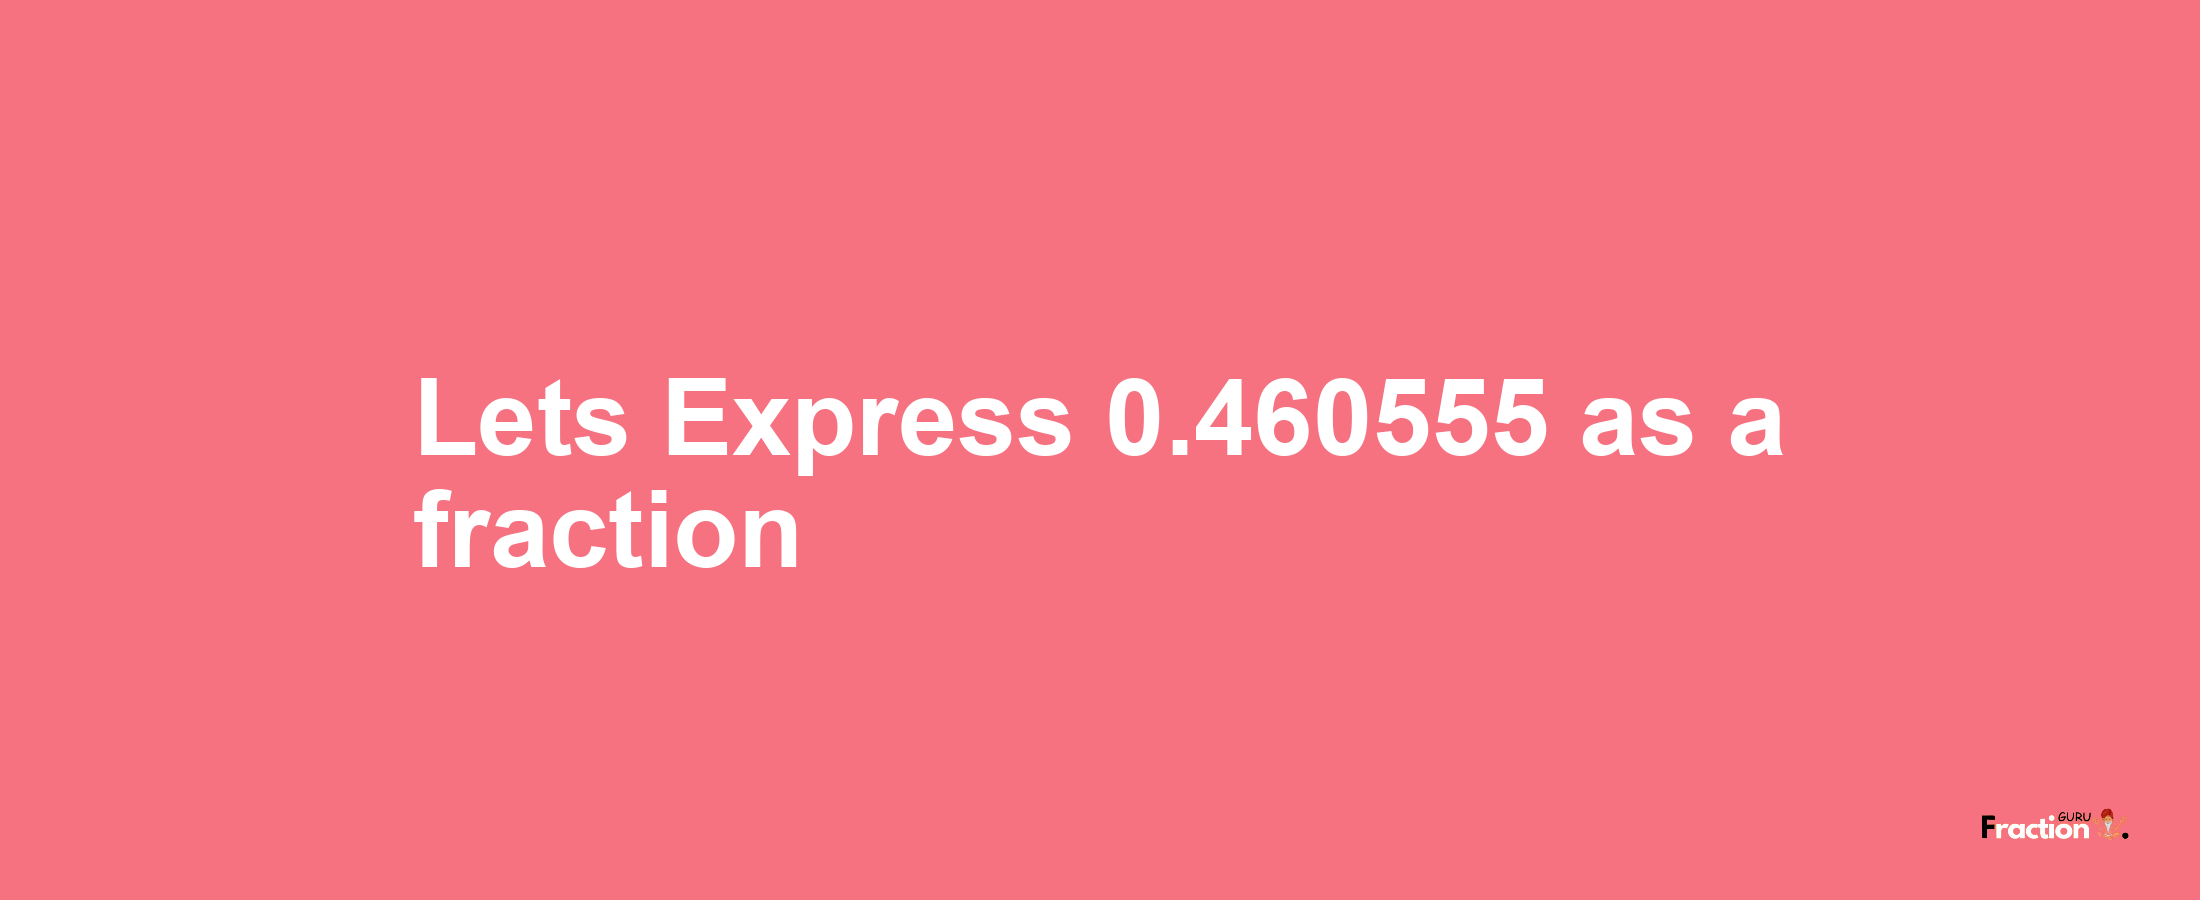 Lets Express 0.460555 as afraction